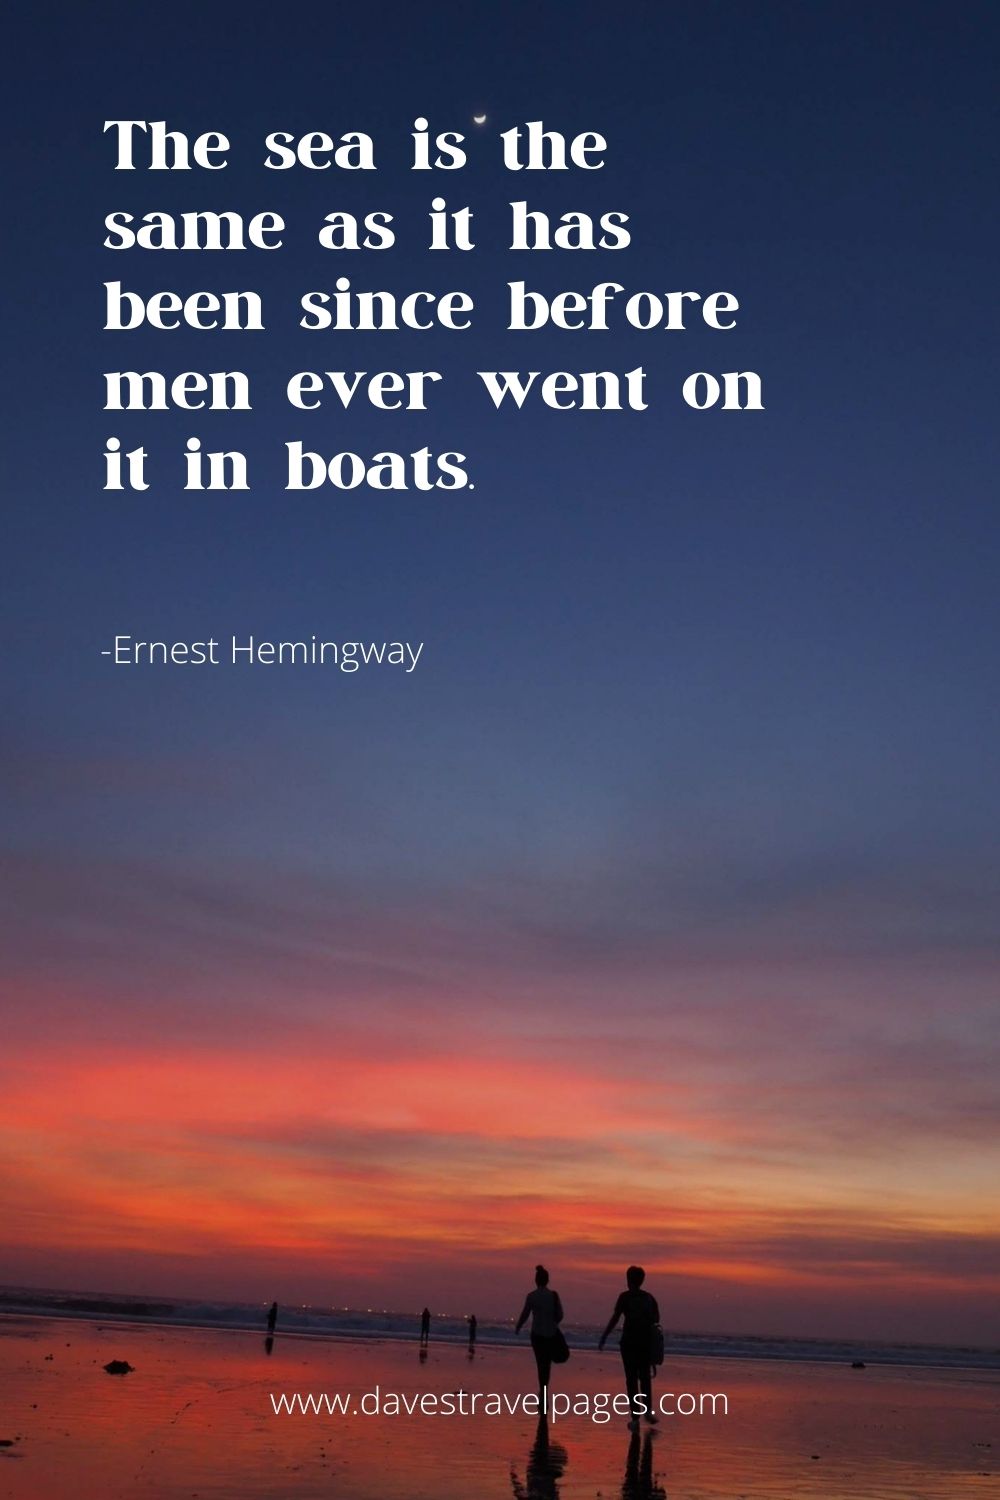 The sea is the same as it has been since before men ever went on it in boats.